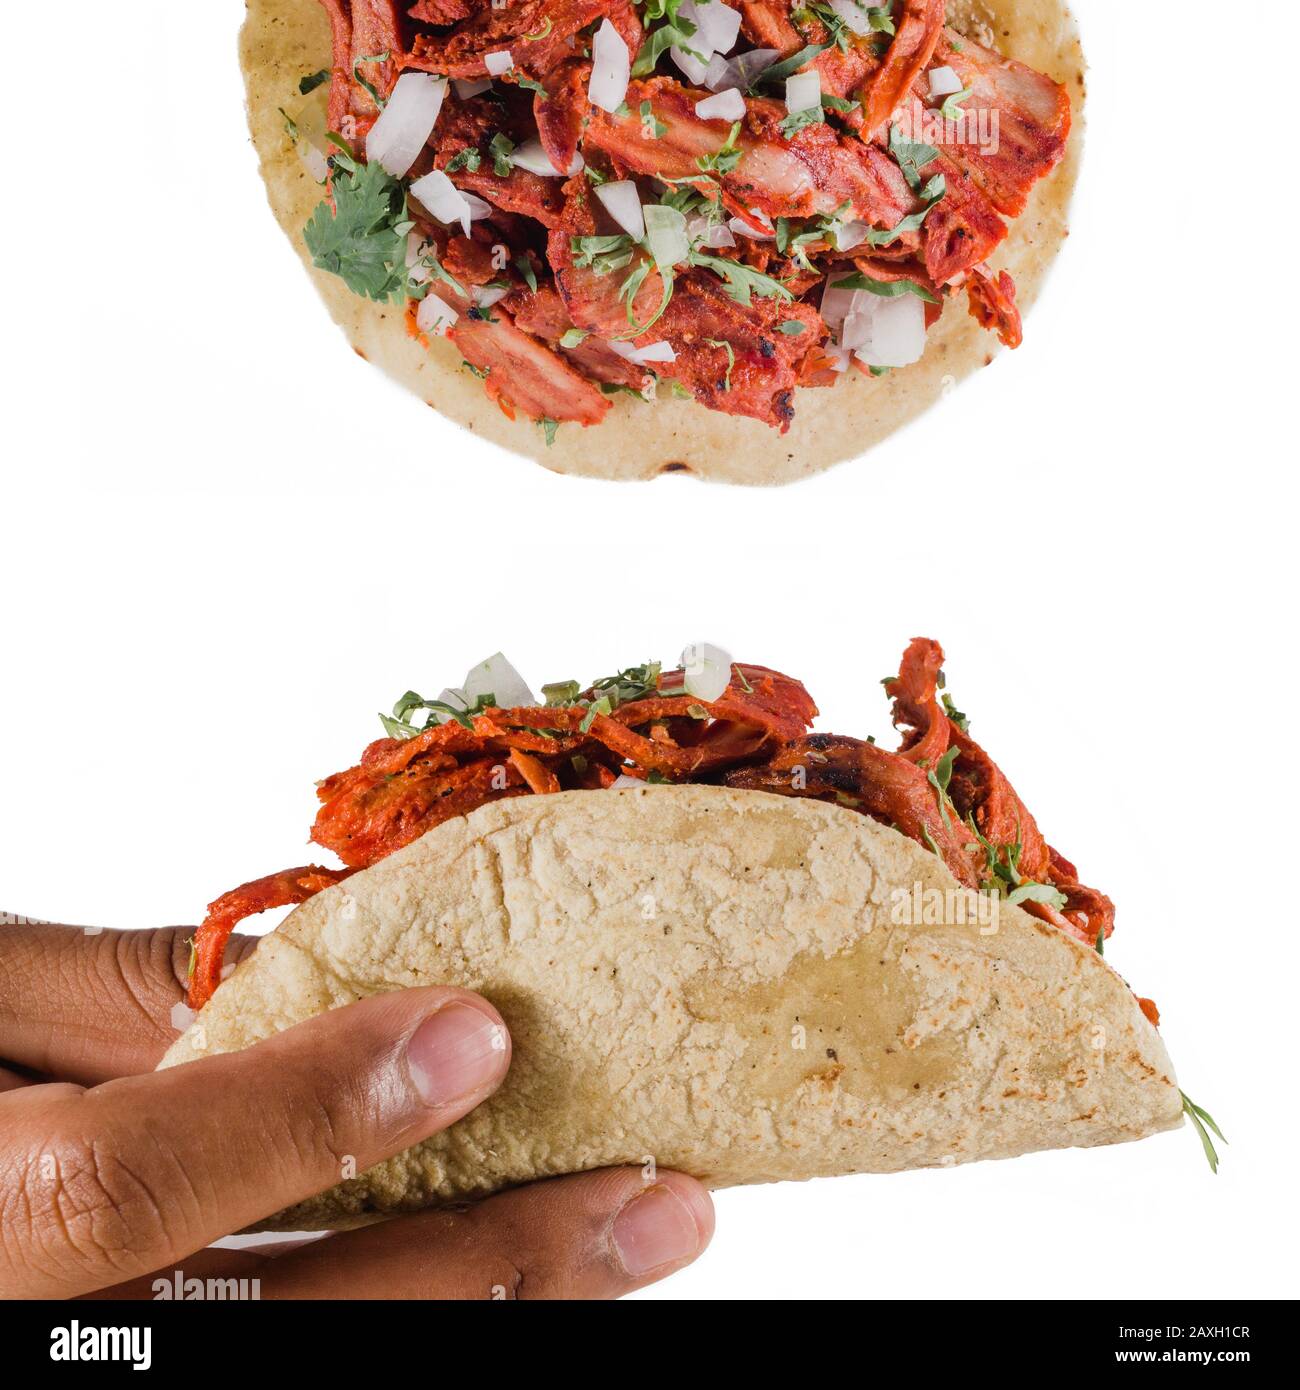 Tacos al pastor design composition on a white background, with a person squeezing lime on it. Authentic mexican tacos with marinated meat, onion Stock Photo